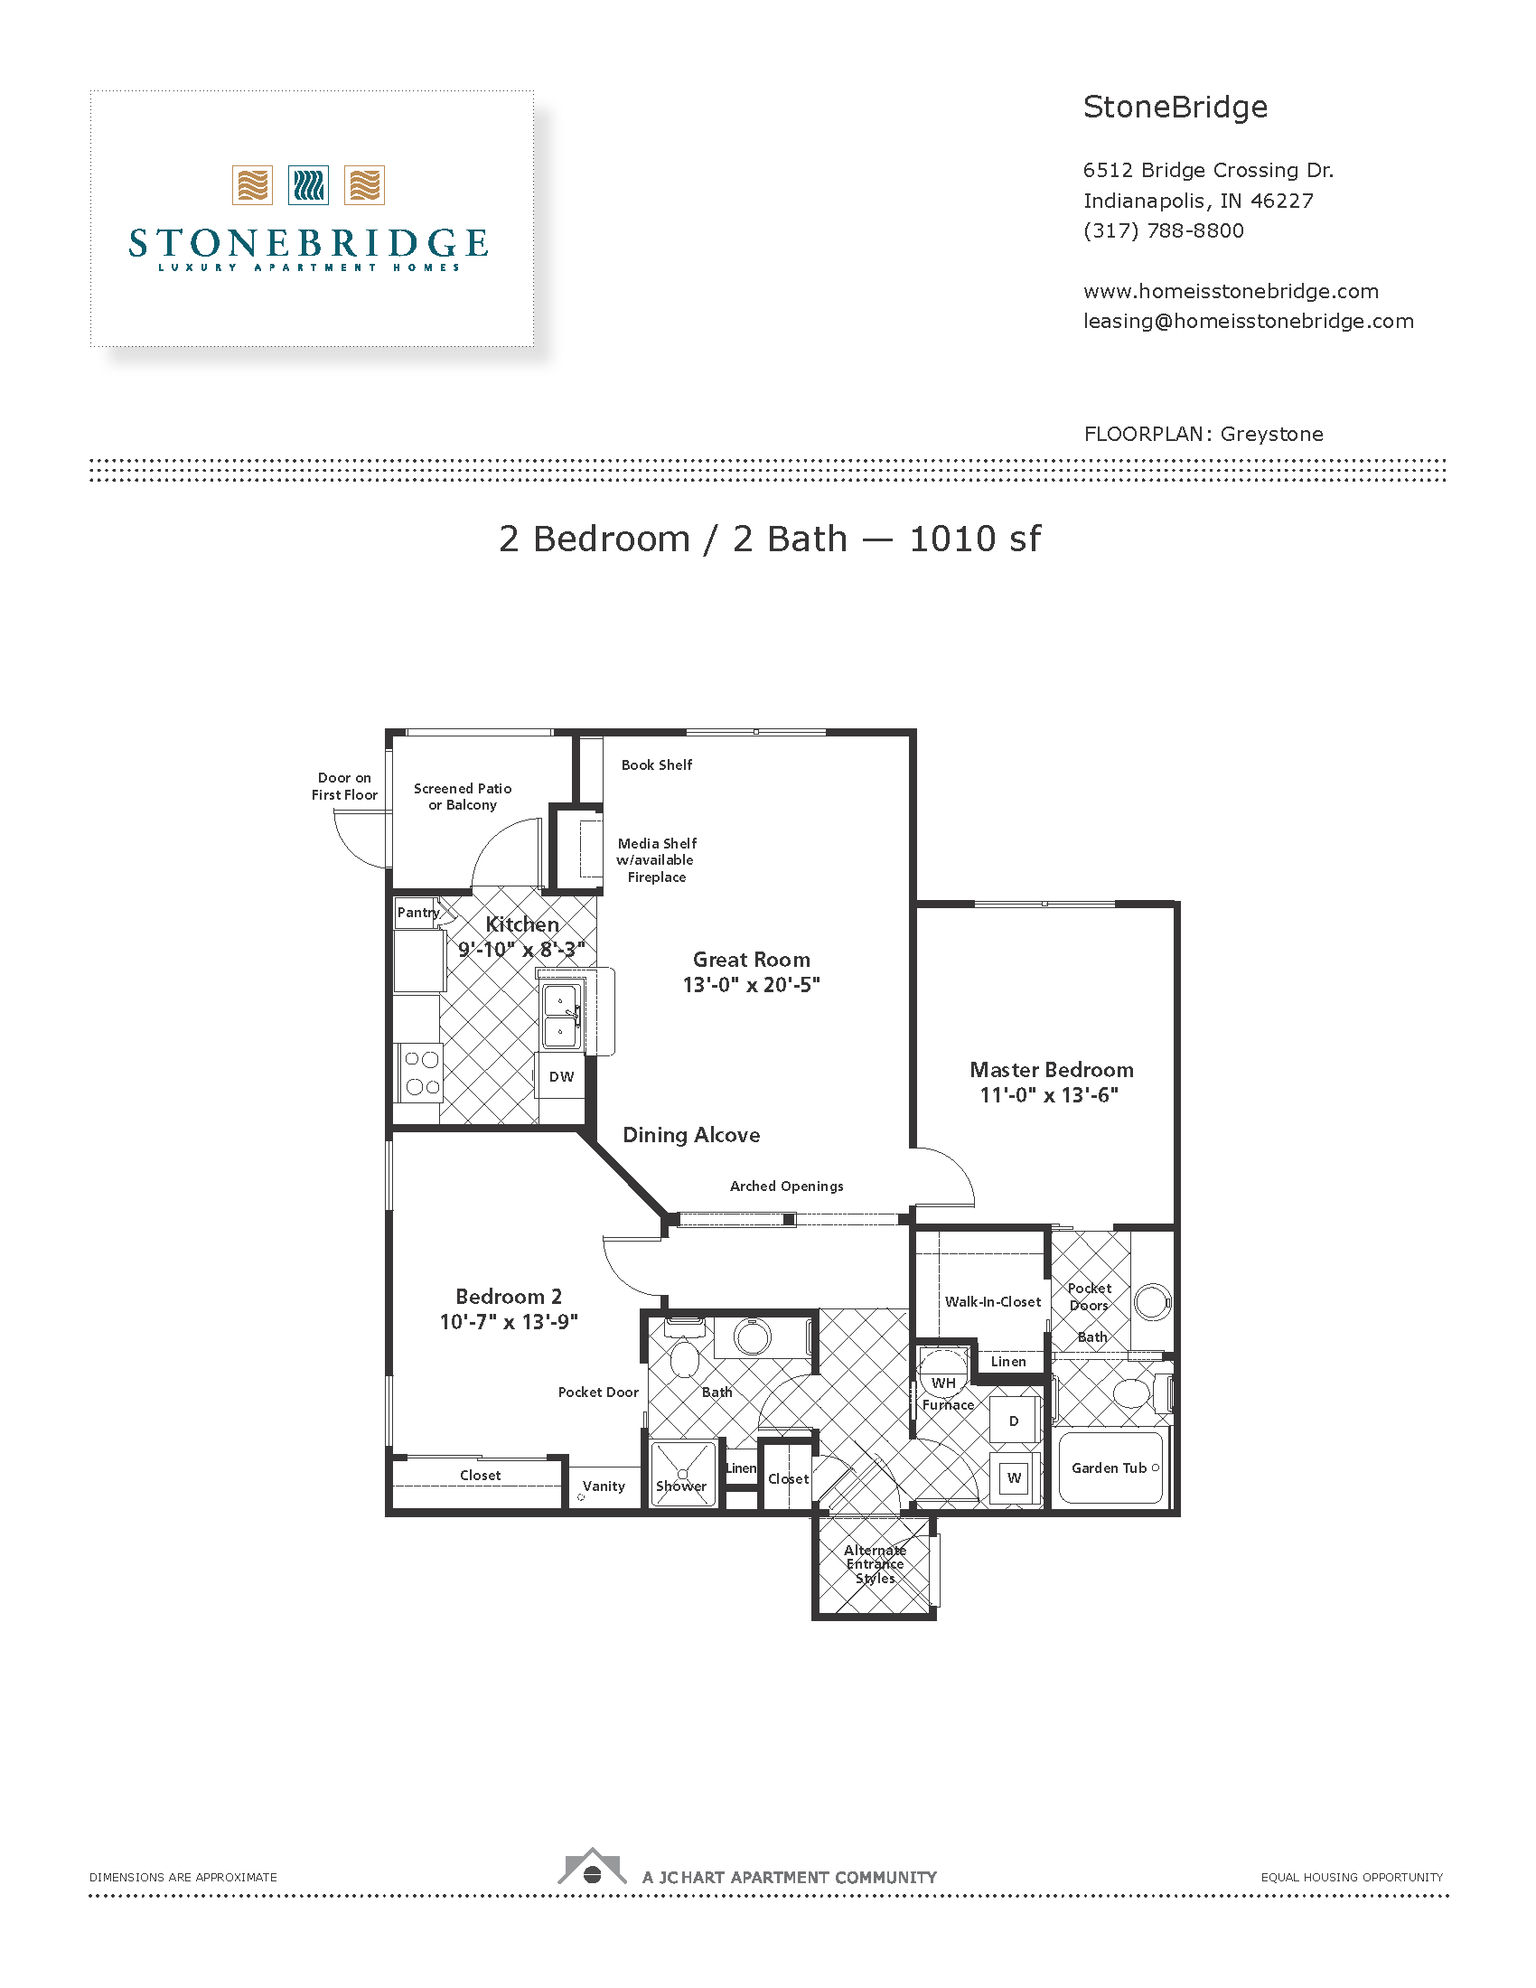 Greystone floor plan - StoneBridge Apartment Homes _ Indianapolis apartments_preview.png